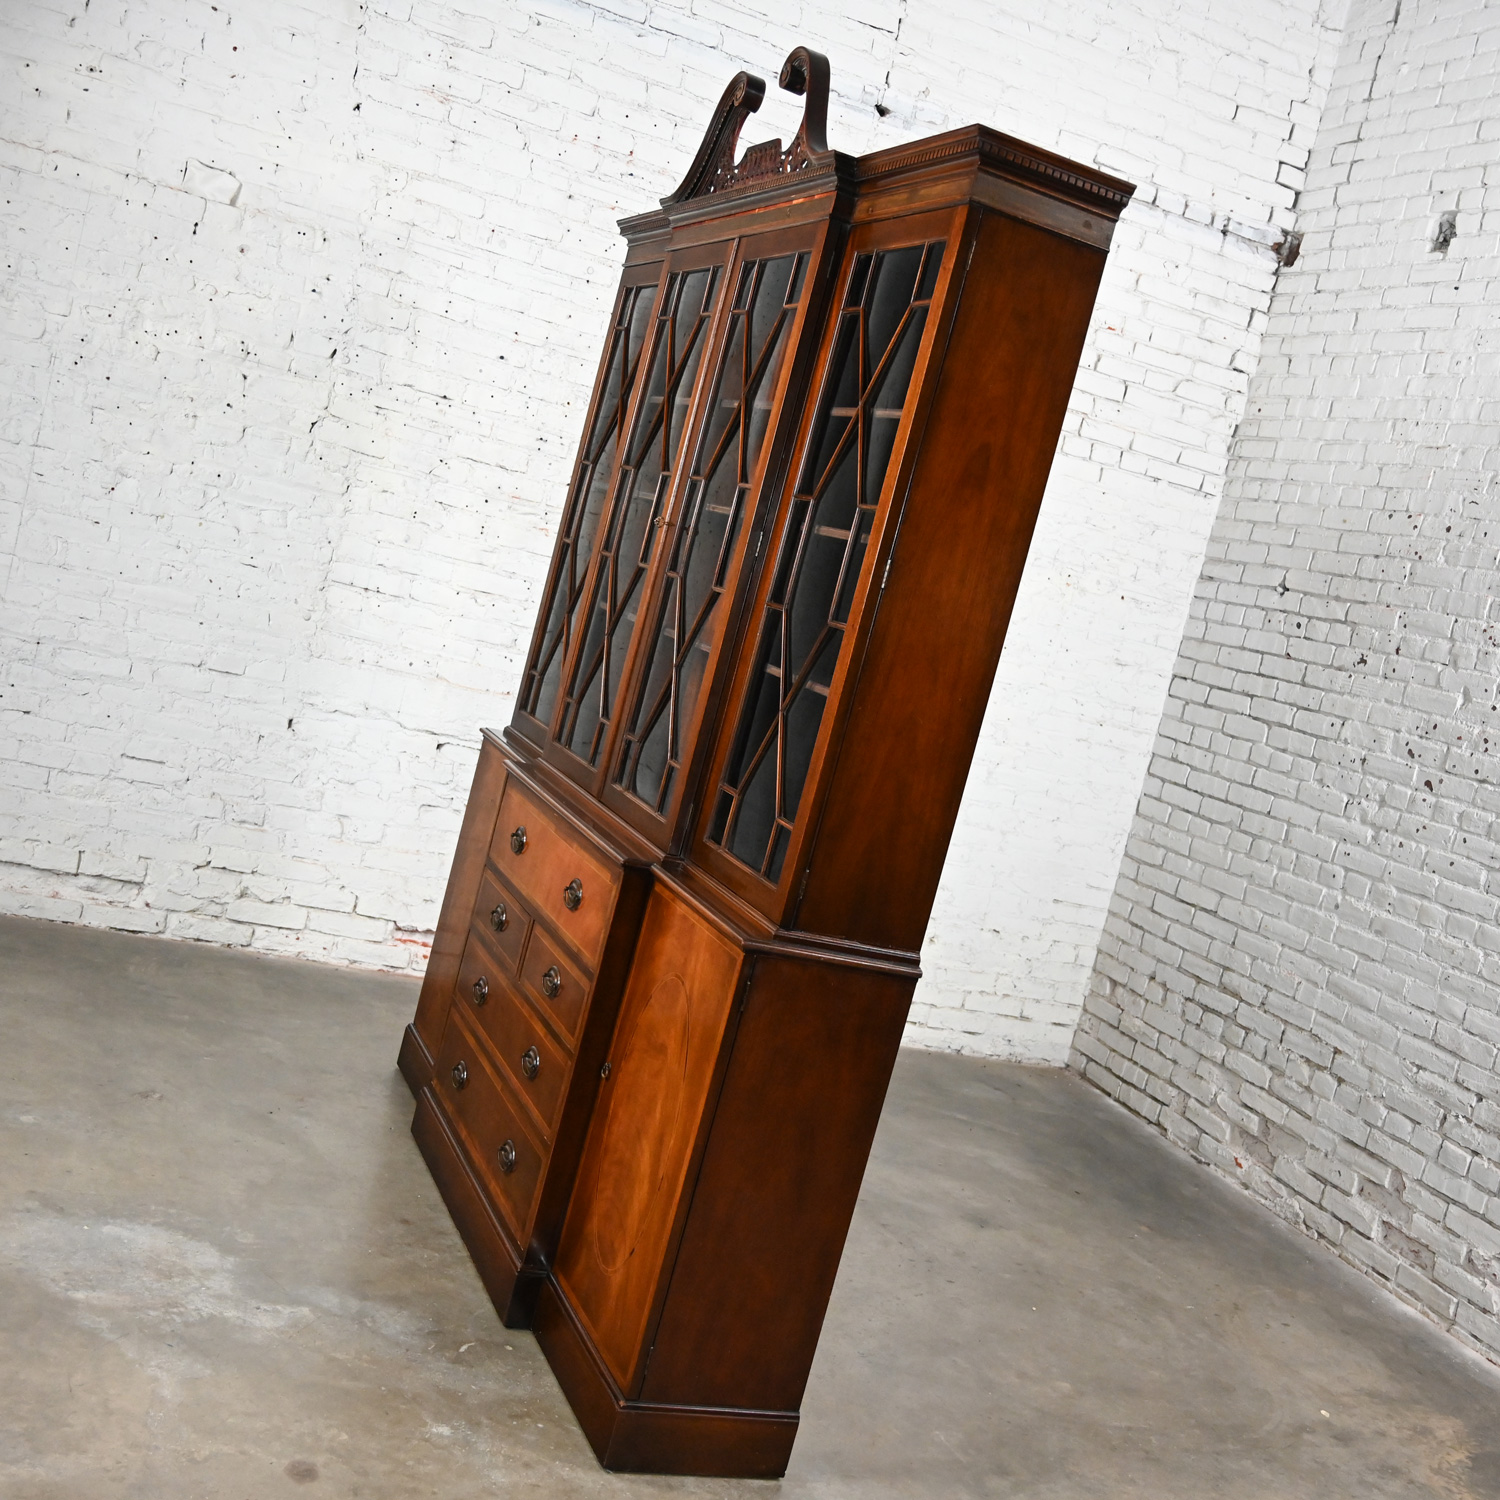 Mid-20th Century Chinese Chippendale Baker Furniture Mahogany & Walnut Breakfront Secretary China Cabinet Bookcase Pierced Pediment Top